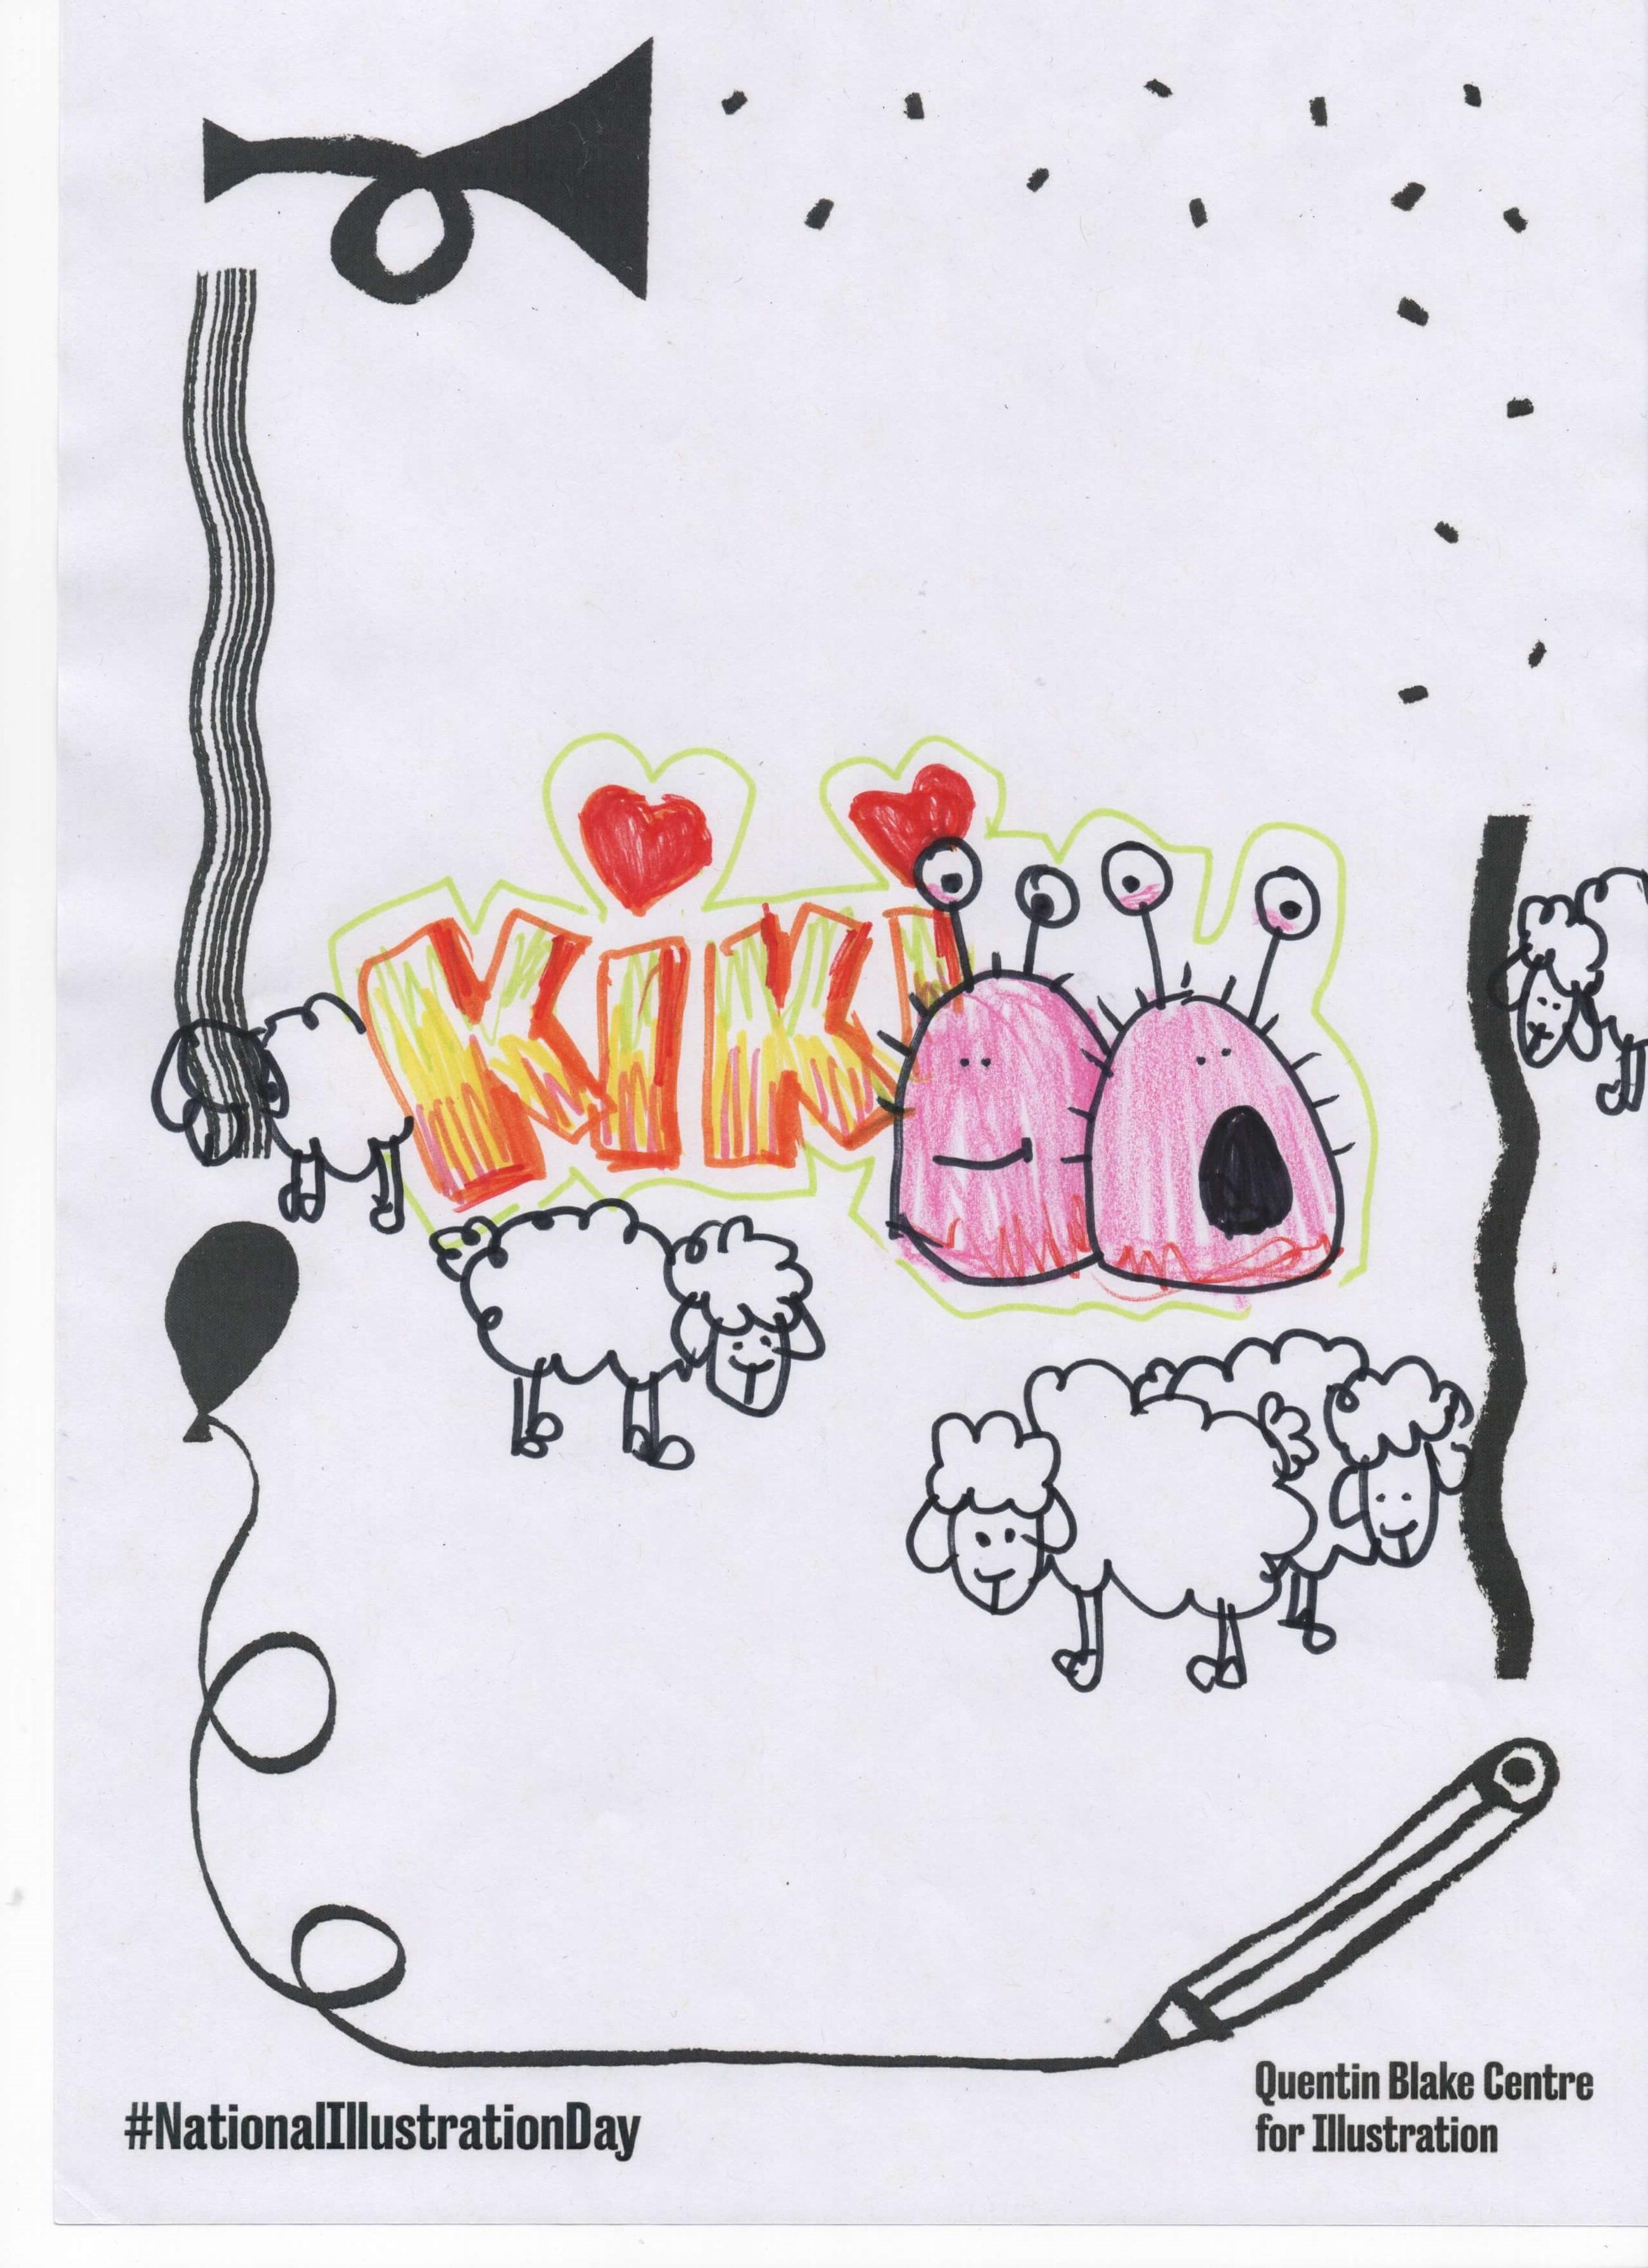 Doodles of sheep and smiling pink alien blobs. The picture includes the name 'Kiki' written in 3D-style block letters with red hearts dotting the 'i's.